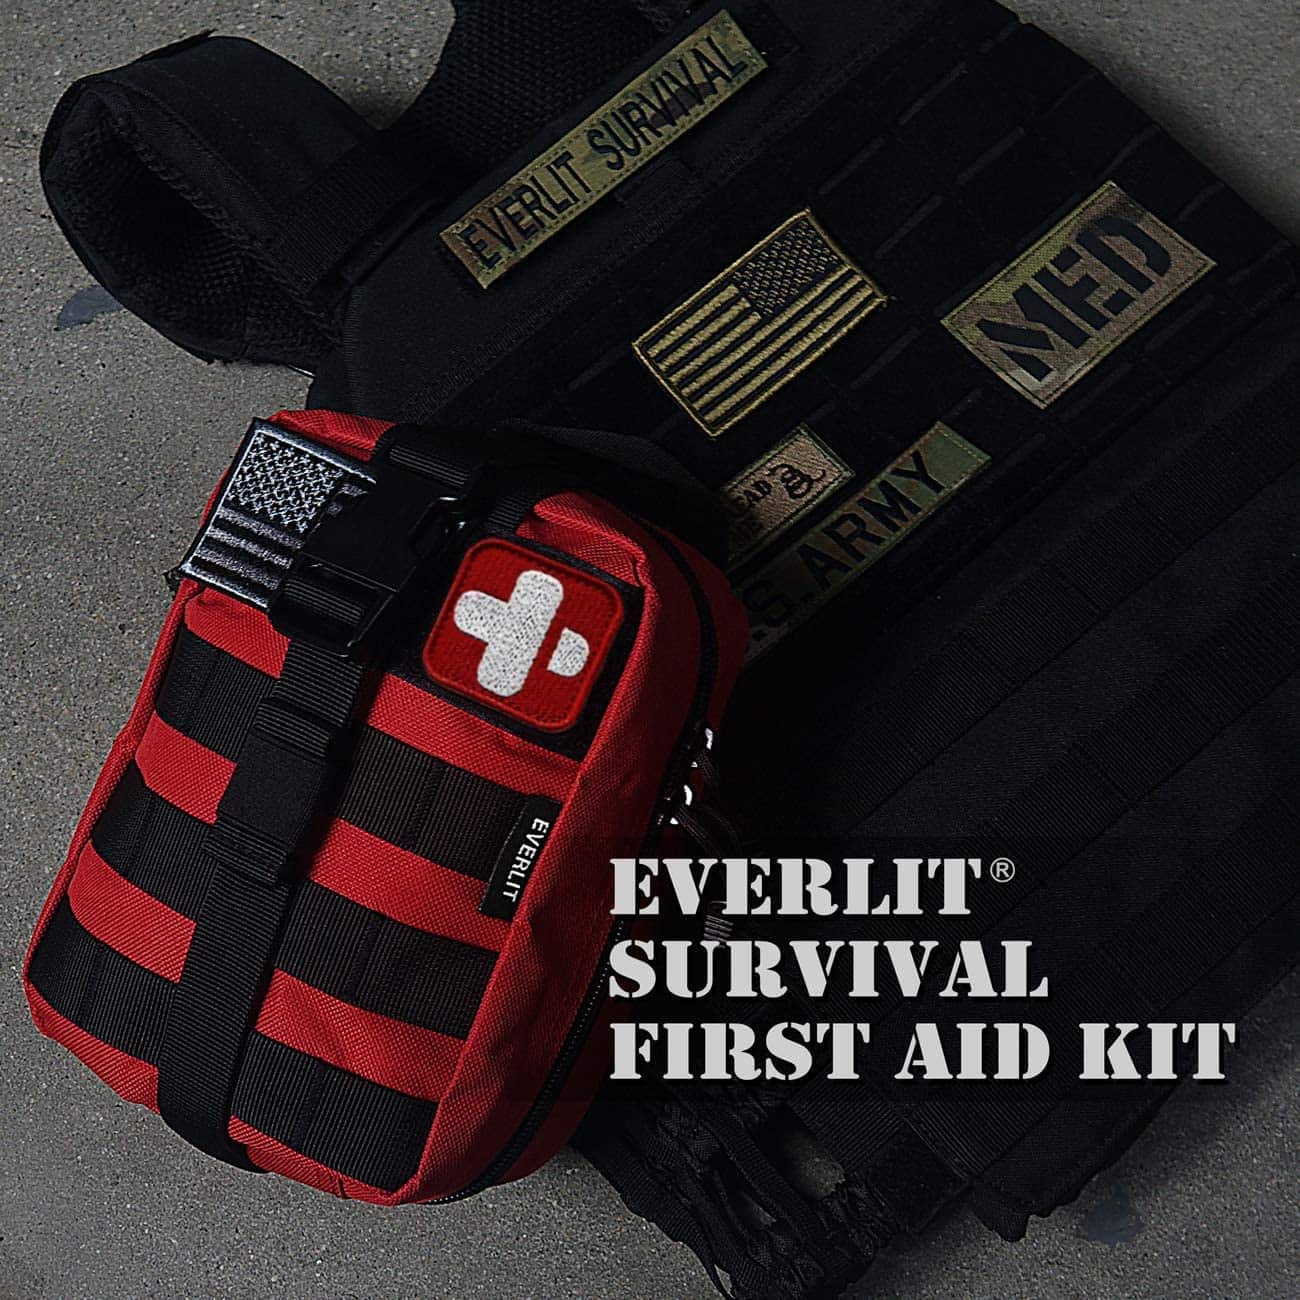 Red Survival First Aid Kit Berisi 250 Buah First Aid Kit - 12 